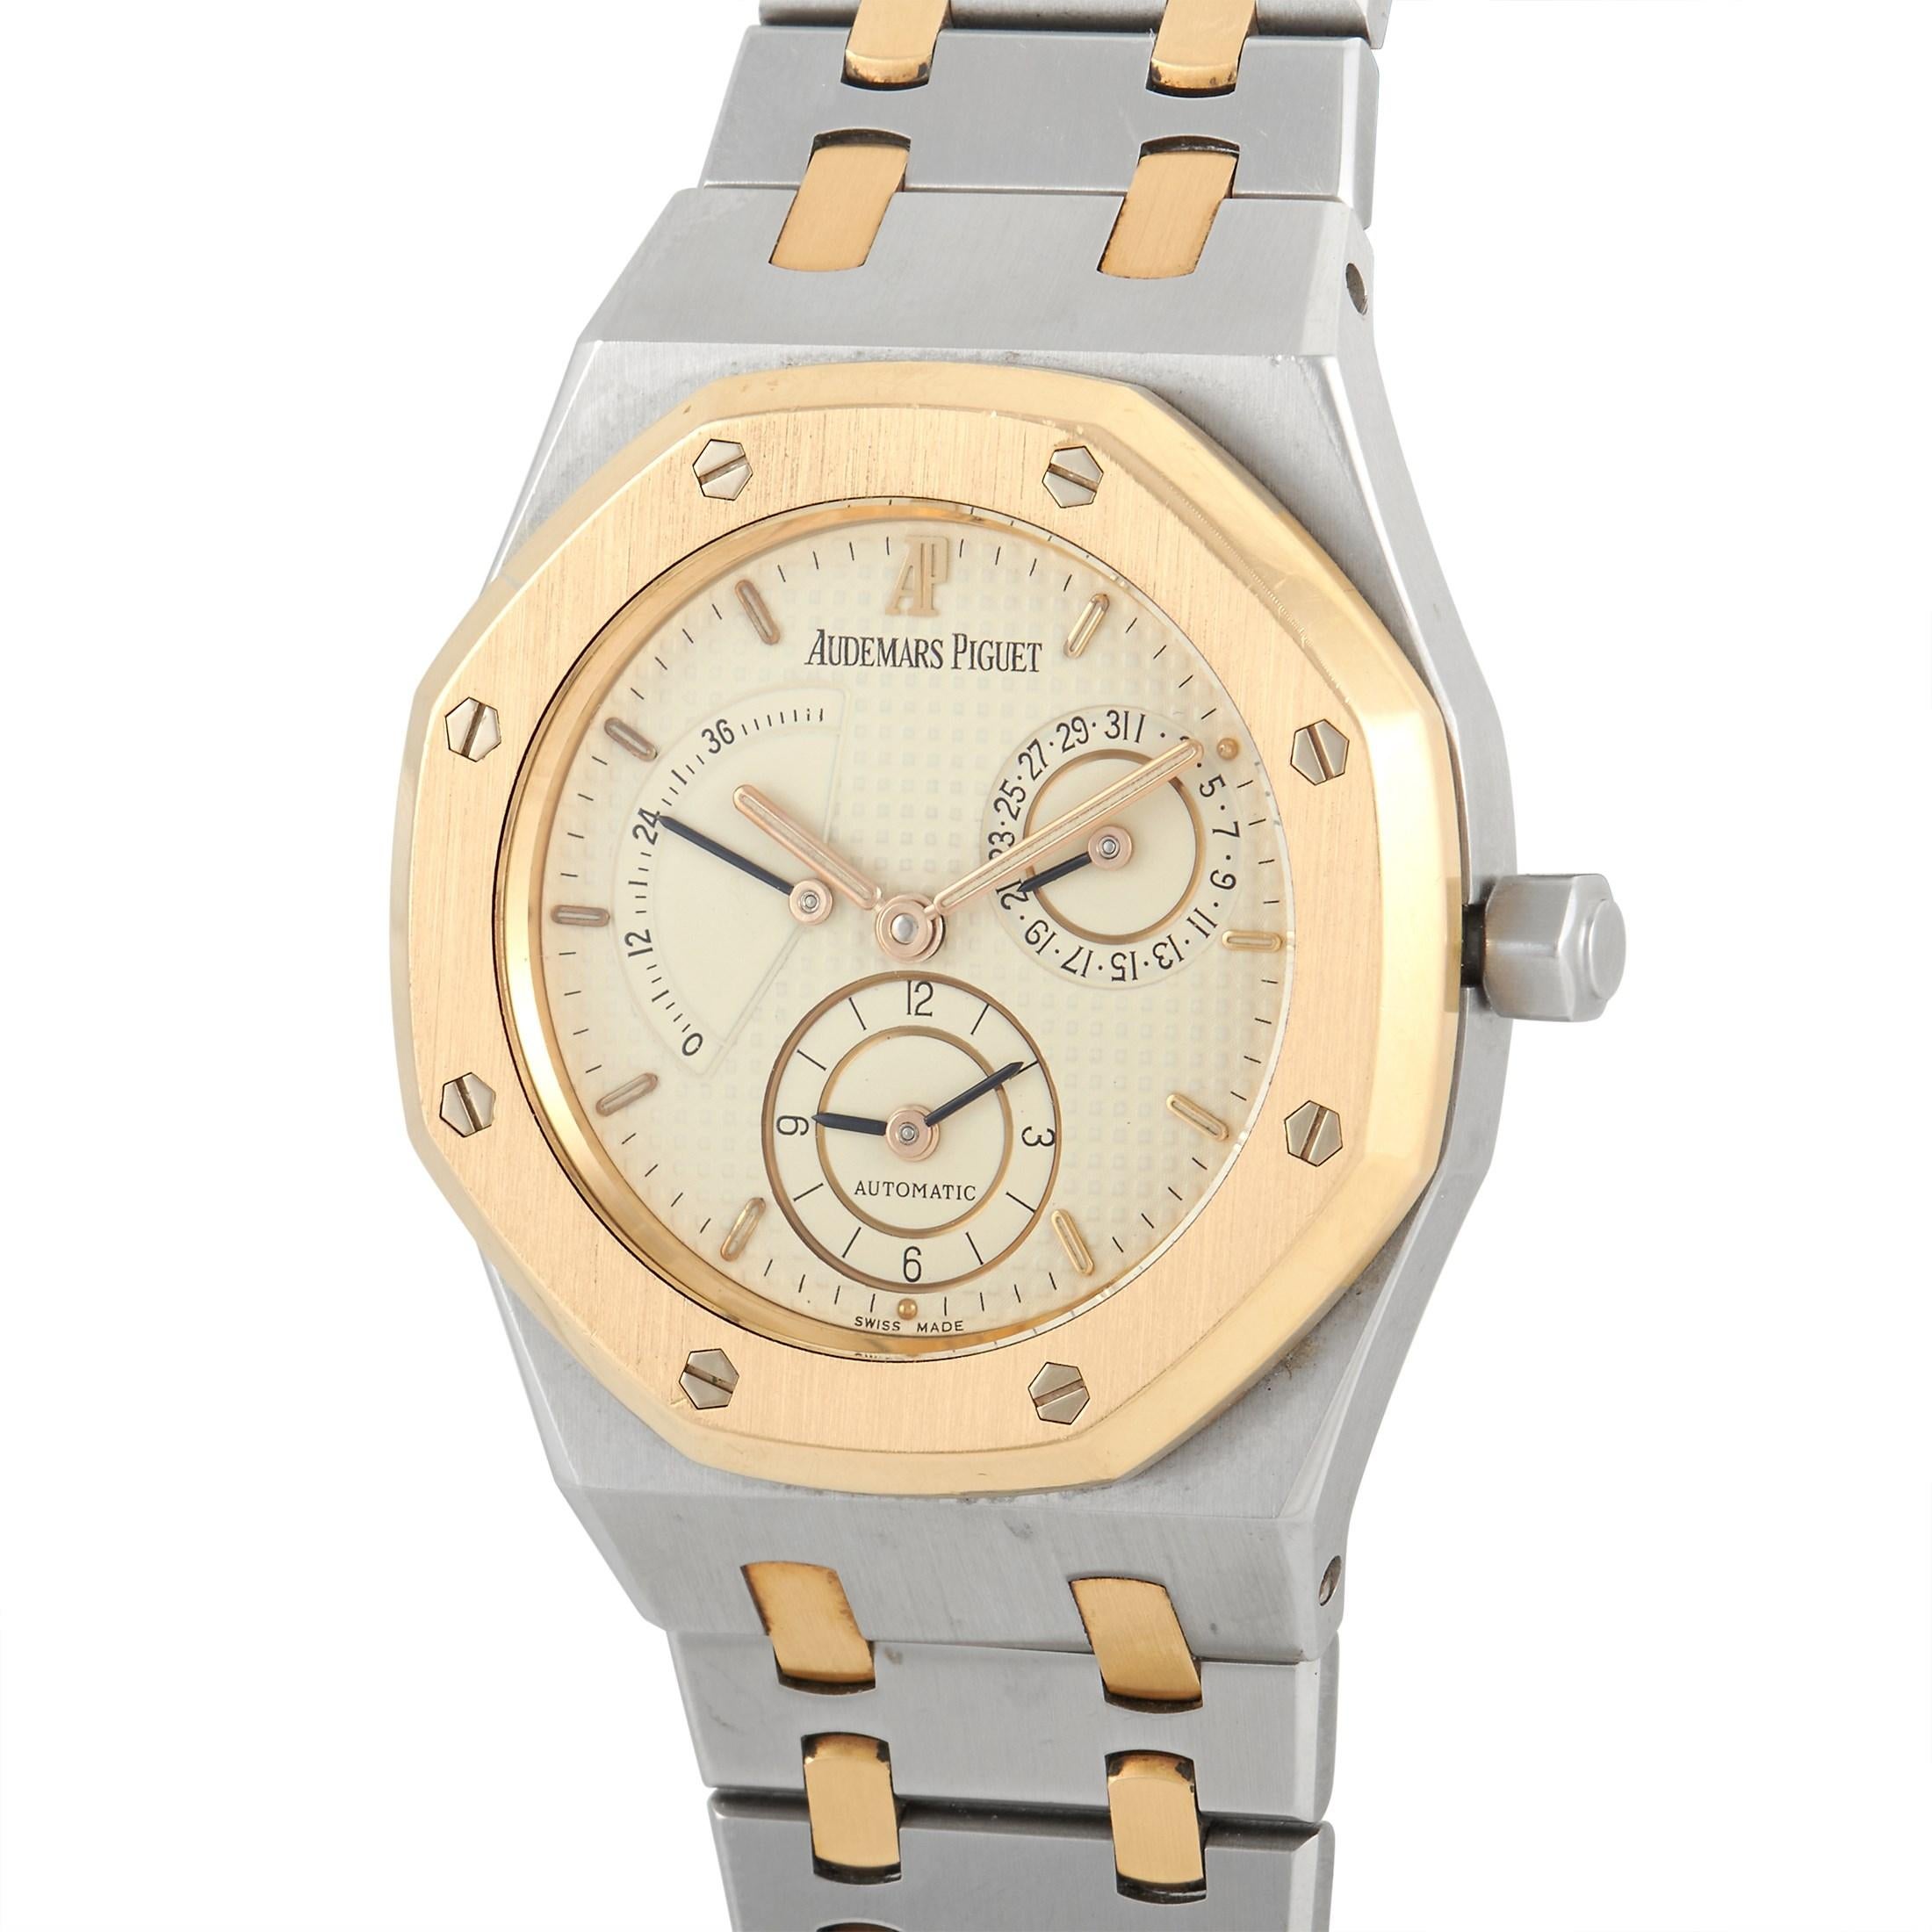 The Audemars Piguet Royal Oak Dual Time Watch, reference number 25730SA, features a bold pairing of metals.

This piece’s 36mm stainless steel case and bracelet are elevated by a bezel made from 18K yellow yold, which also accents the links of the